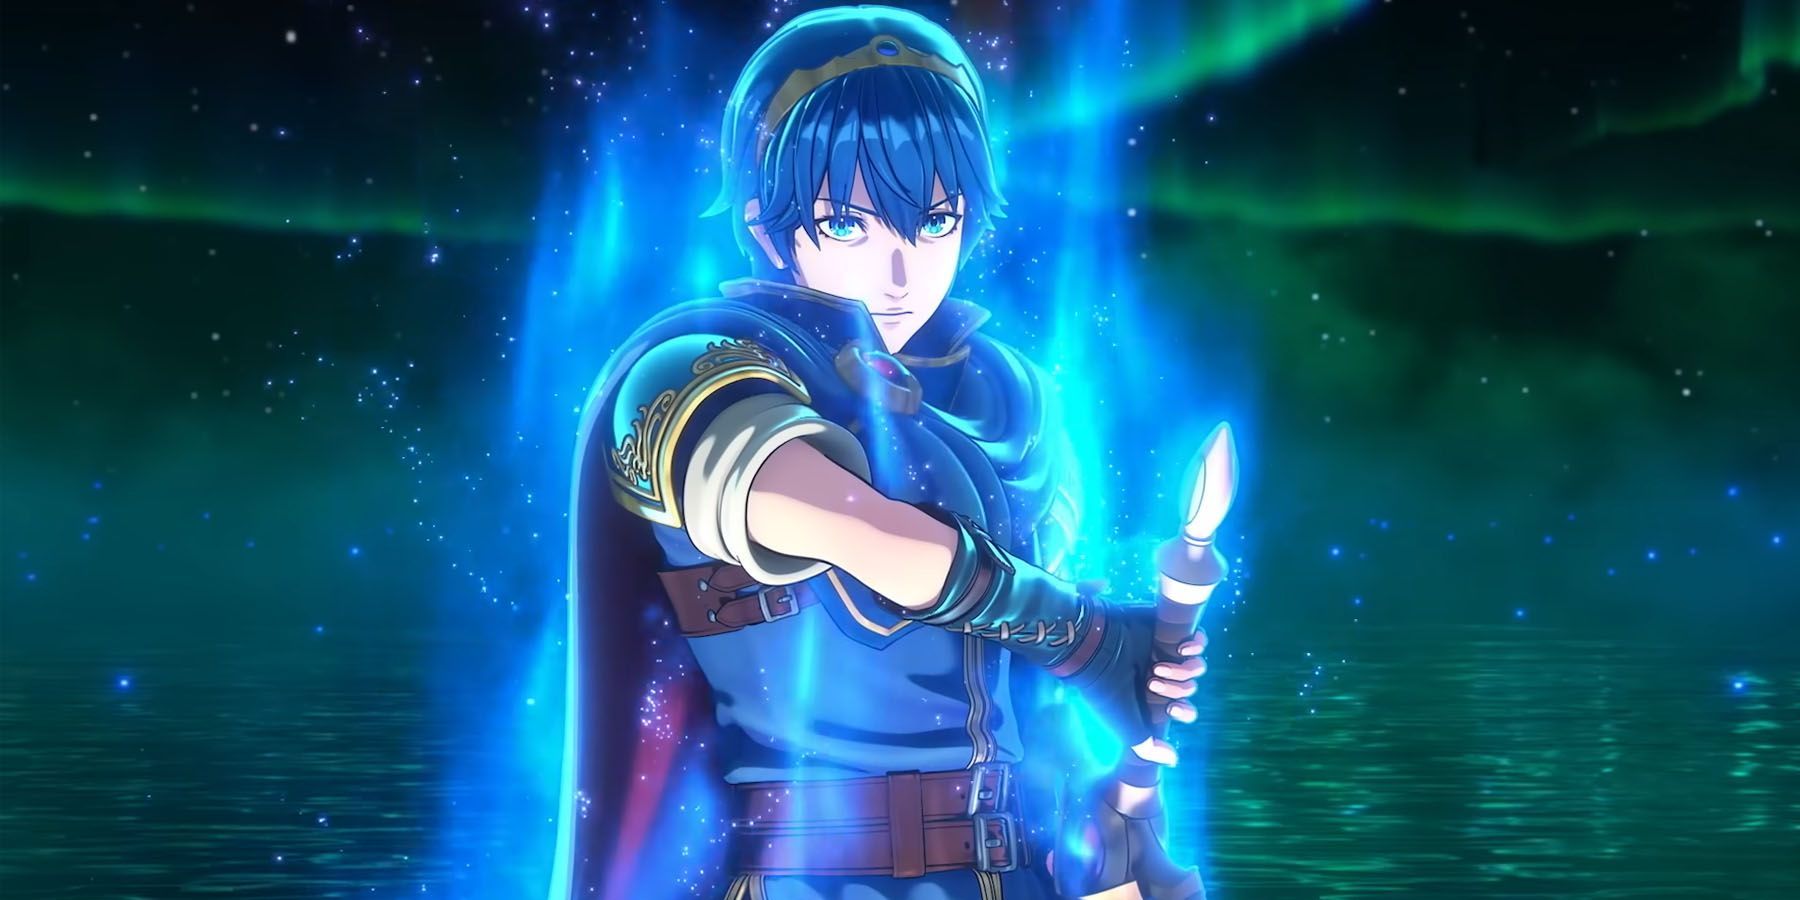 Marth being summoned in Fire Emblem Engage